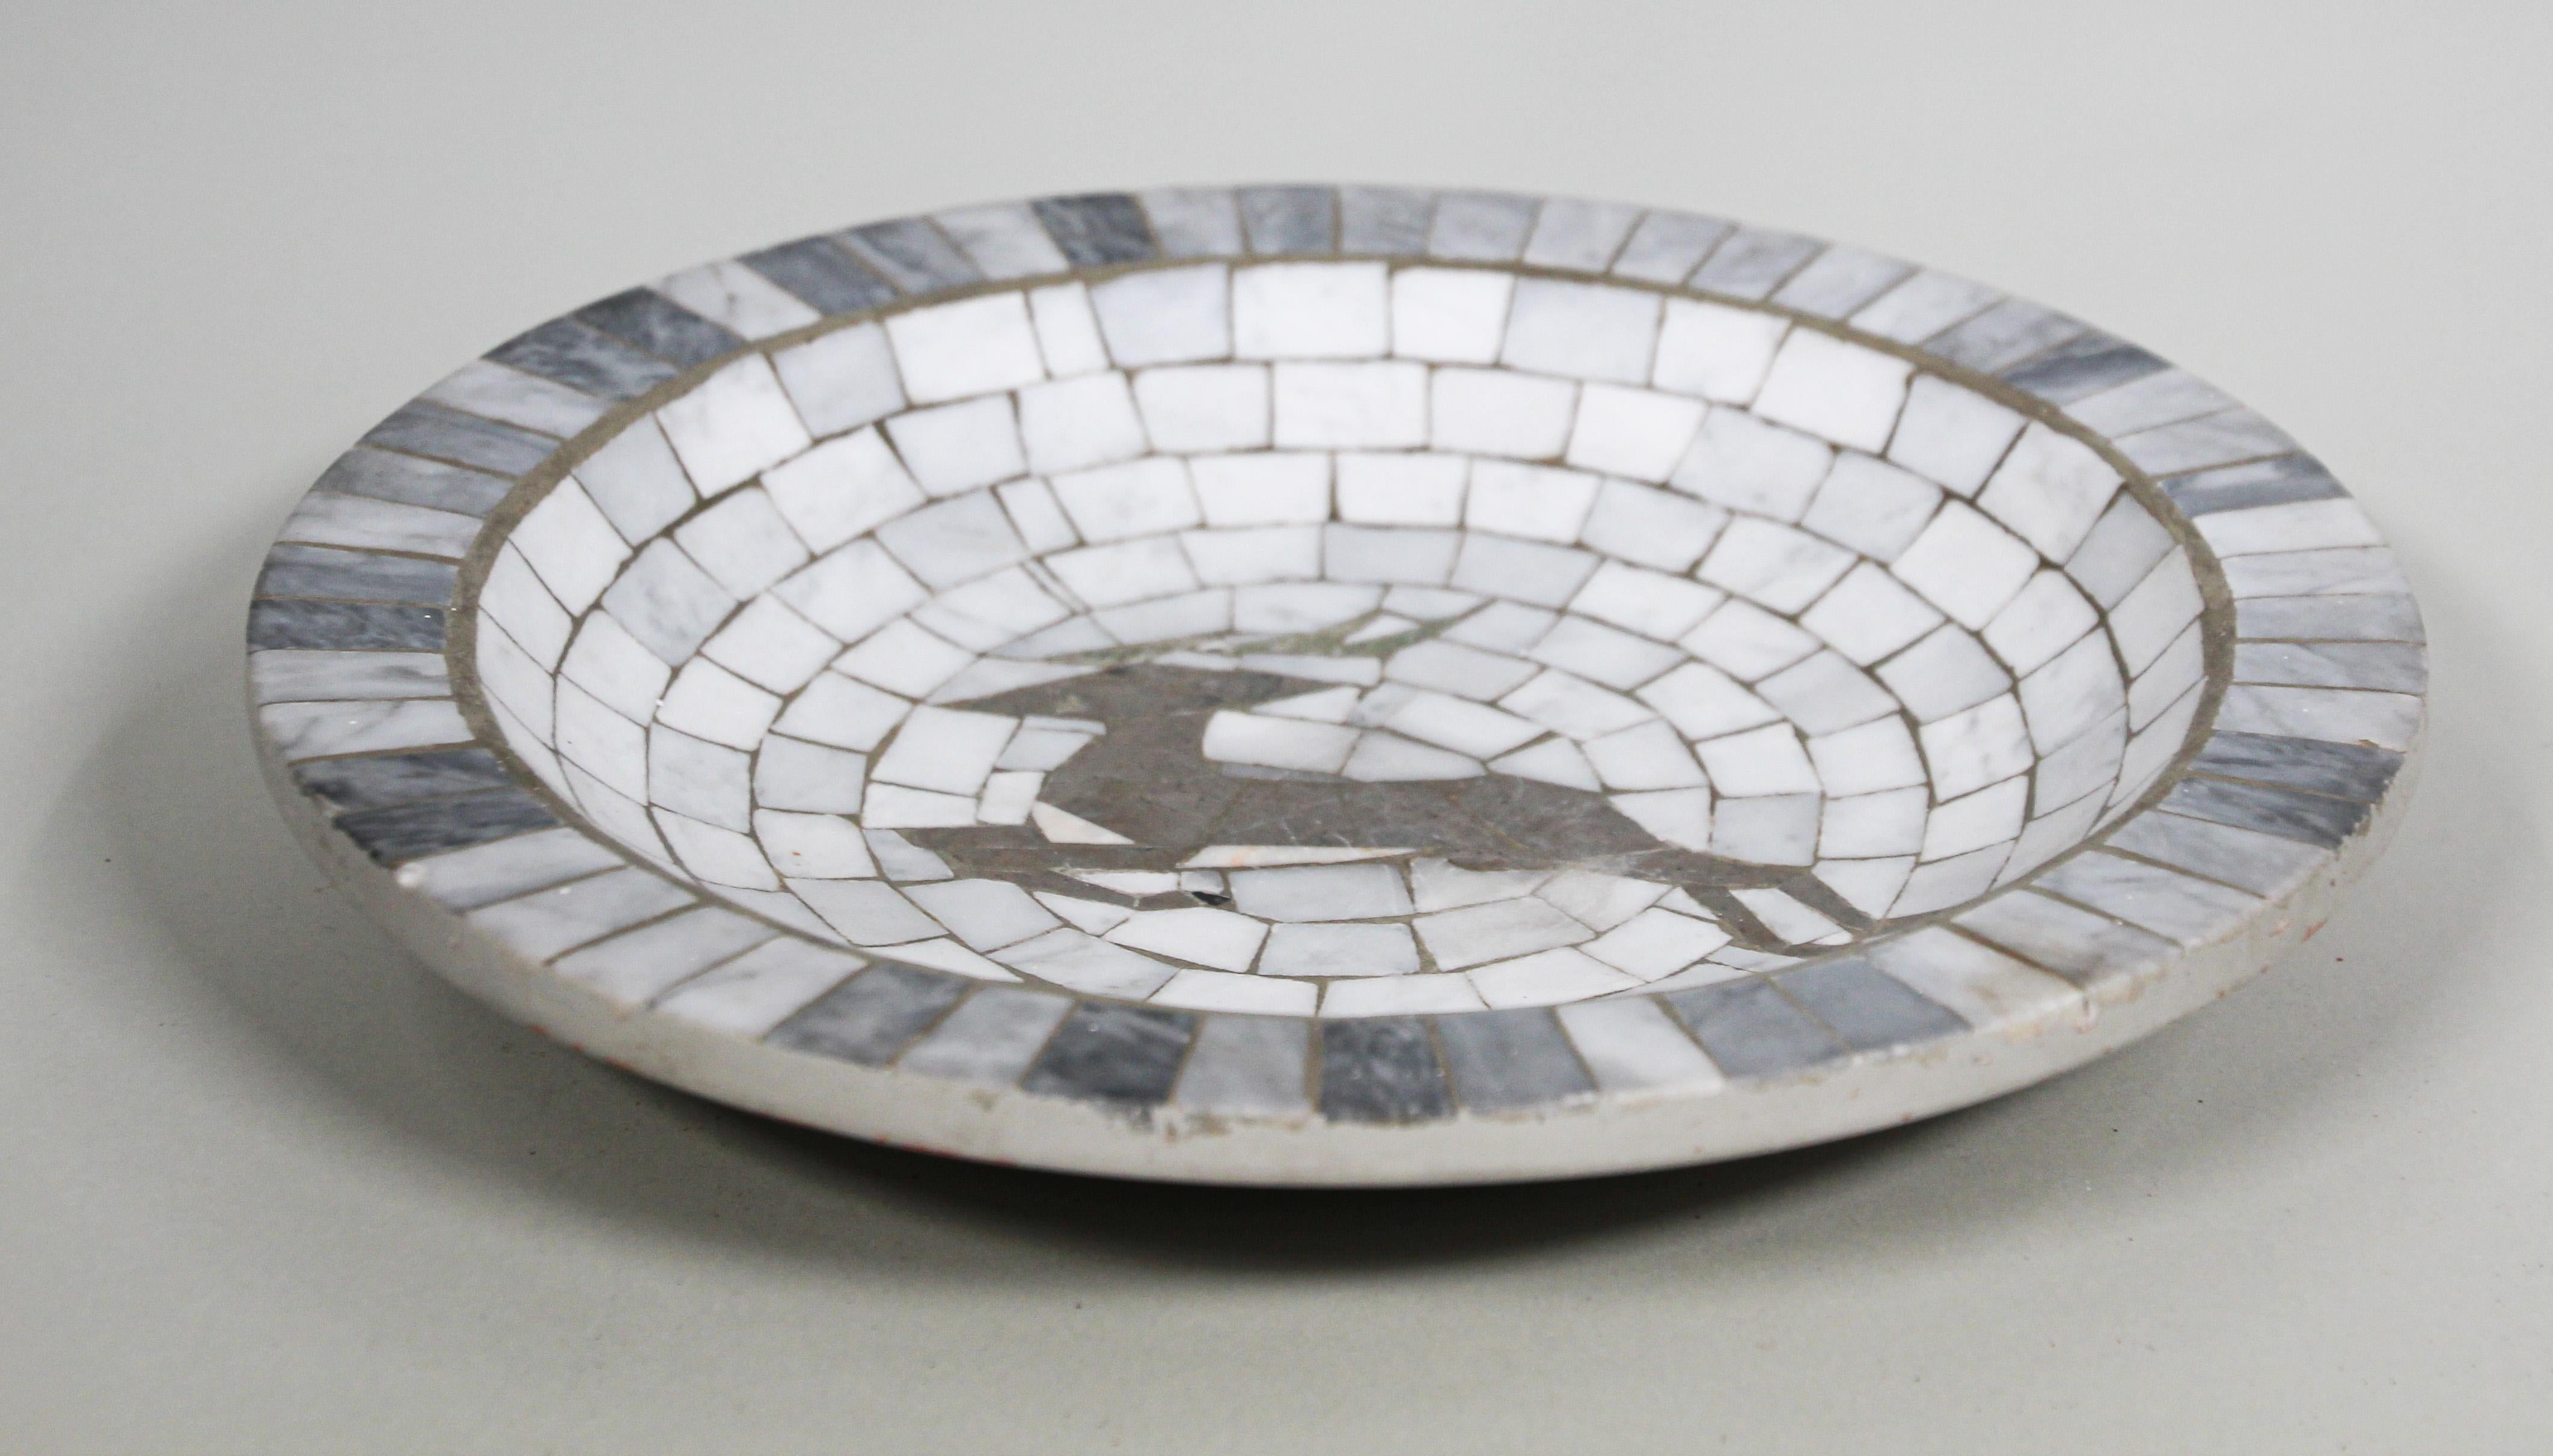 Heide Mosaic Denmark vide poche or decorative small dish.
Danish handwork Heide of Copenhagen marble mosaic work in white and grey colors.
Midcentury European Danish mosaic catchall plate with deer or stag.
Marked on bottom 